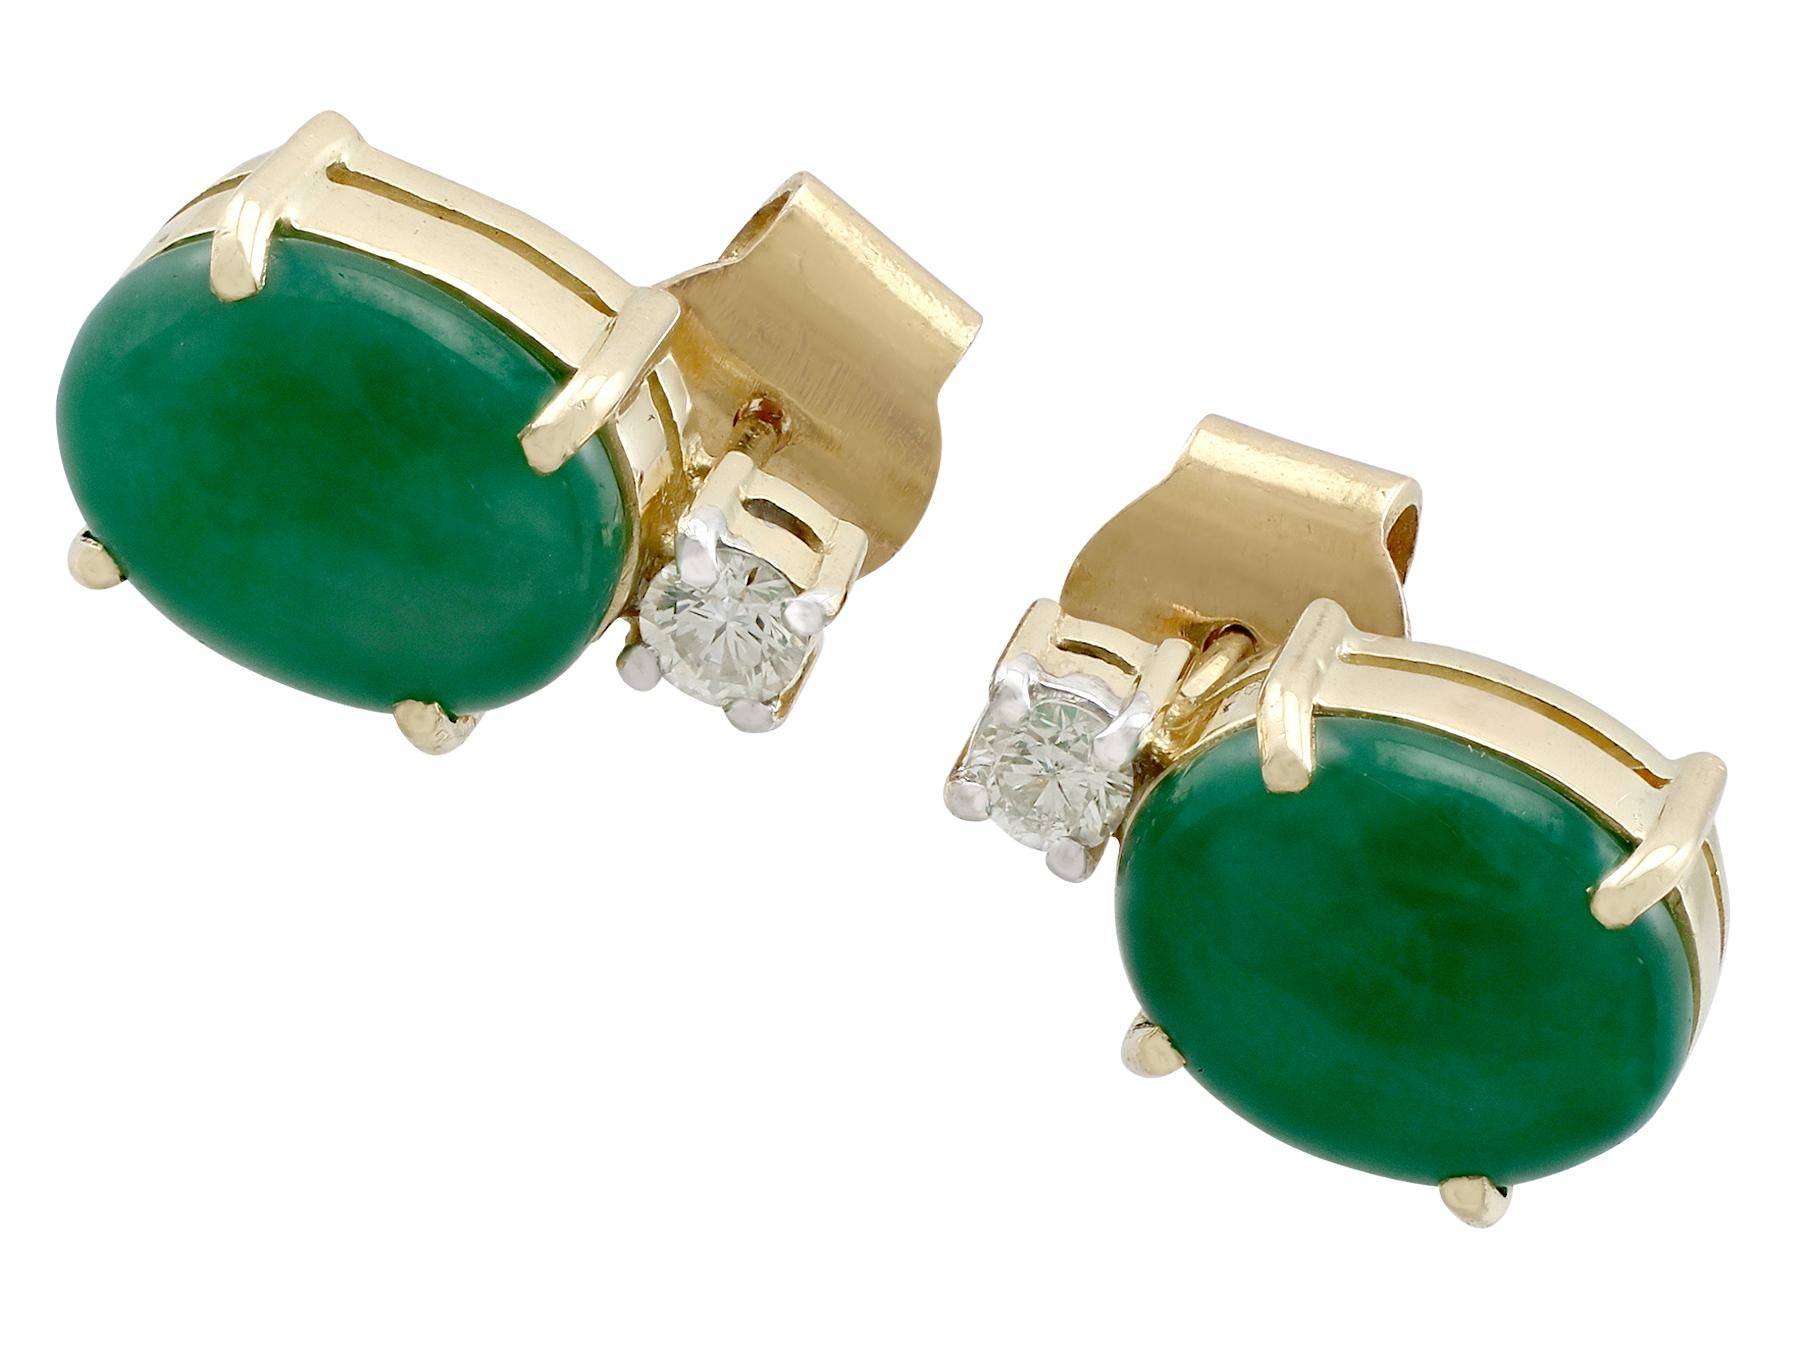 An impressive pair of 4.46 carat jade and 0.28 carat diamond, 18 carat yellow and white gold stud earrings; part of our diverse vintage jewellery and estate jewelry collections.

These fine and impressive vintage jade and diamond earrings have been